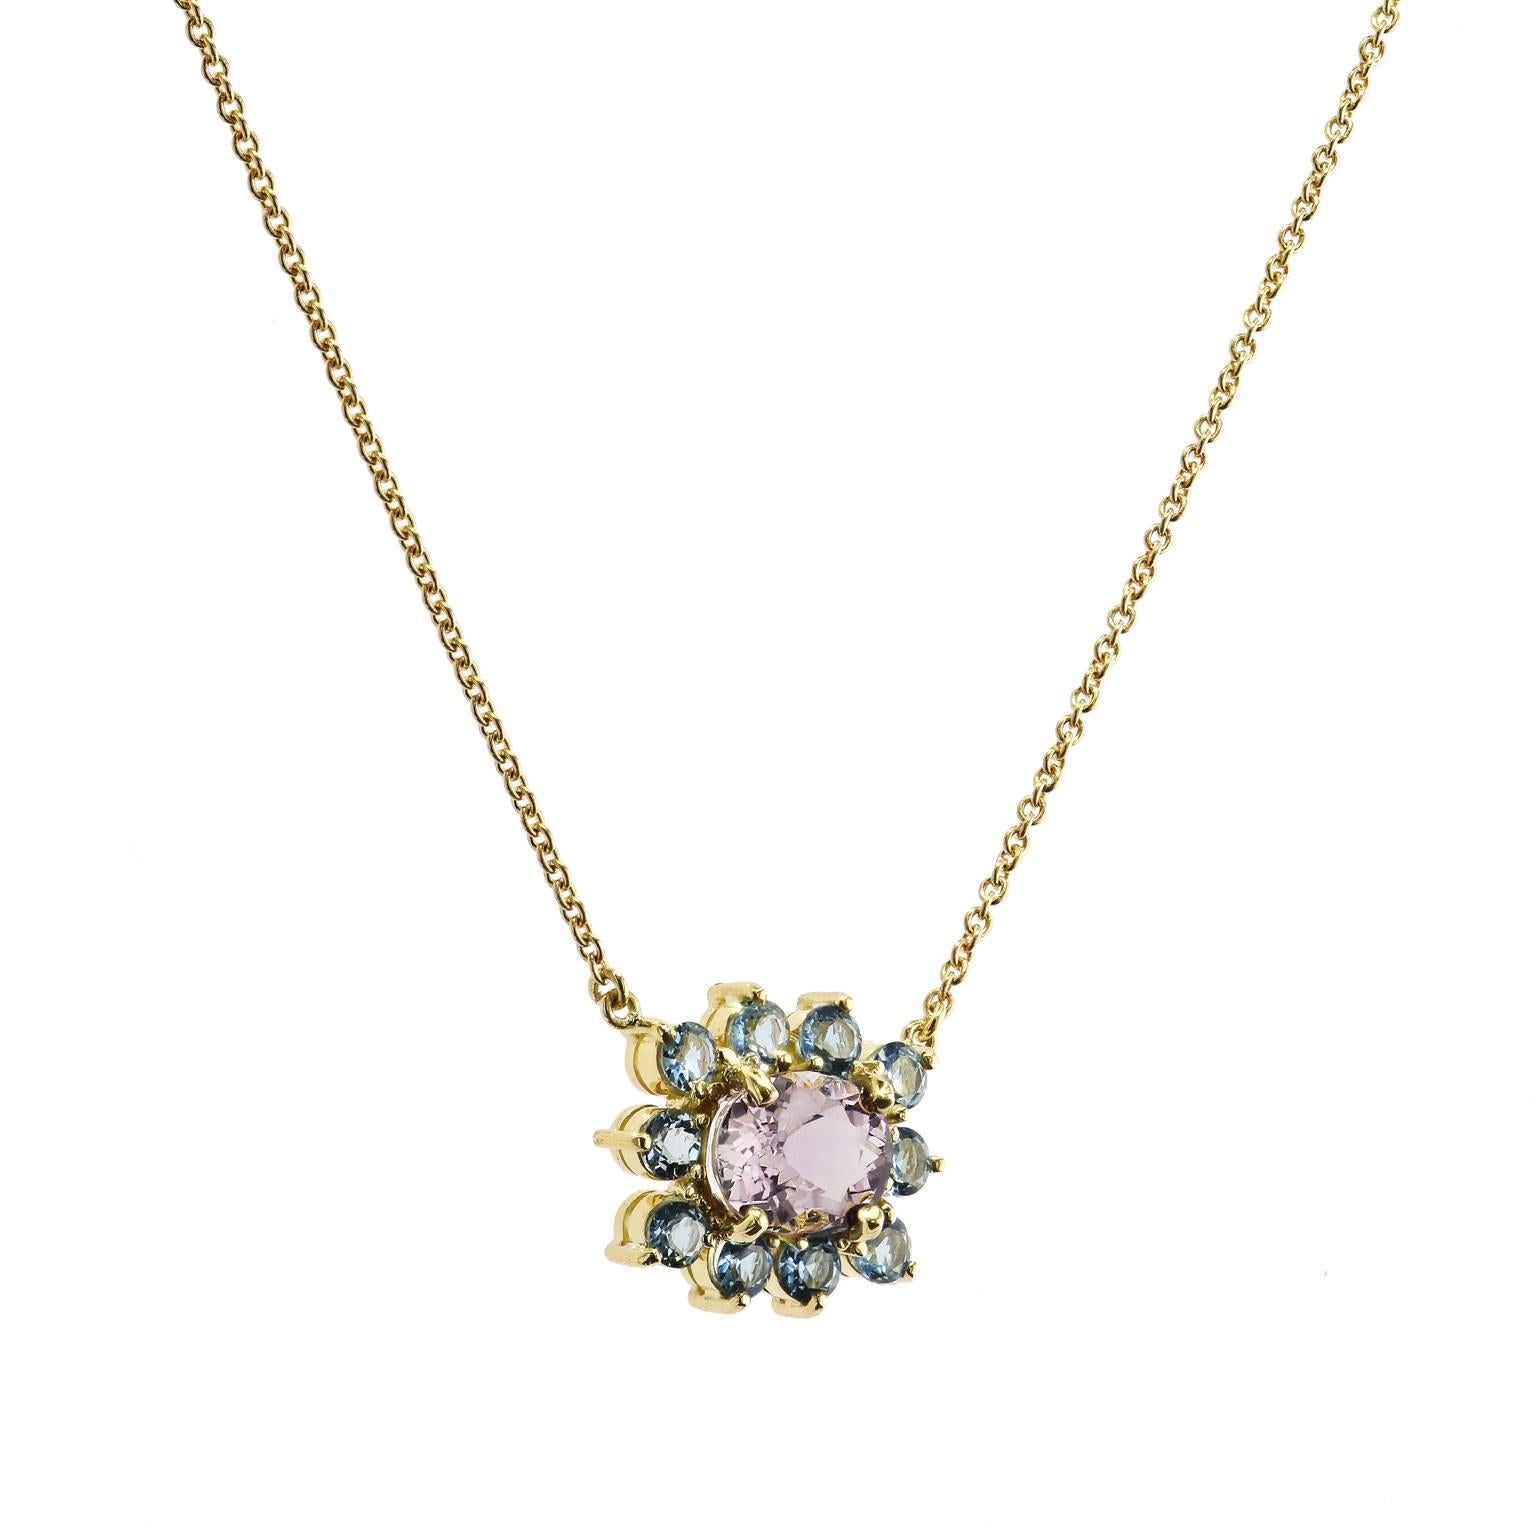 2.02 Carat Champagne Tourmaline and Aquamarine Pendant Necklace

This beautiful necklace is a handmade, one of a kind piece from H&H Jewels.  It features a
2.02 carat oval-shaped champagne tourmaline that is surrounded by 0.85 carats of